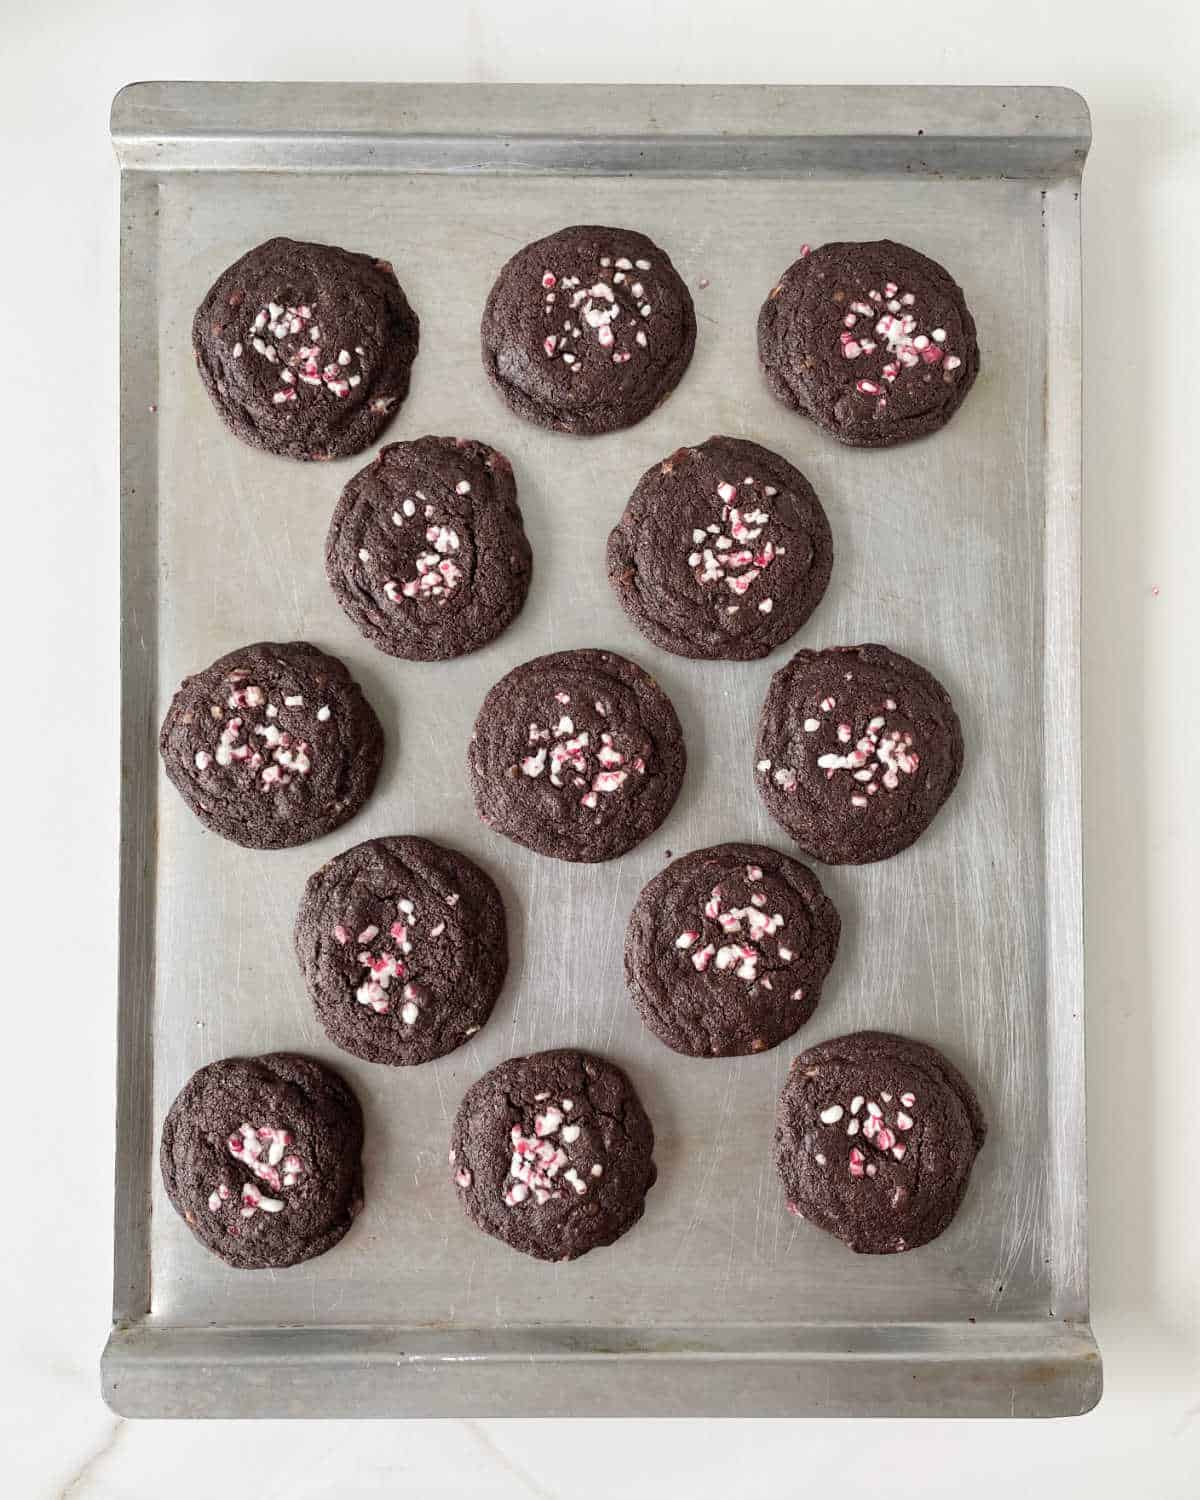 Top view of baked chocolate cookies with crushed peppermint candy on a metal baking sheet.